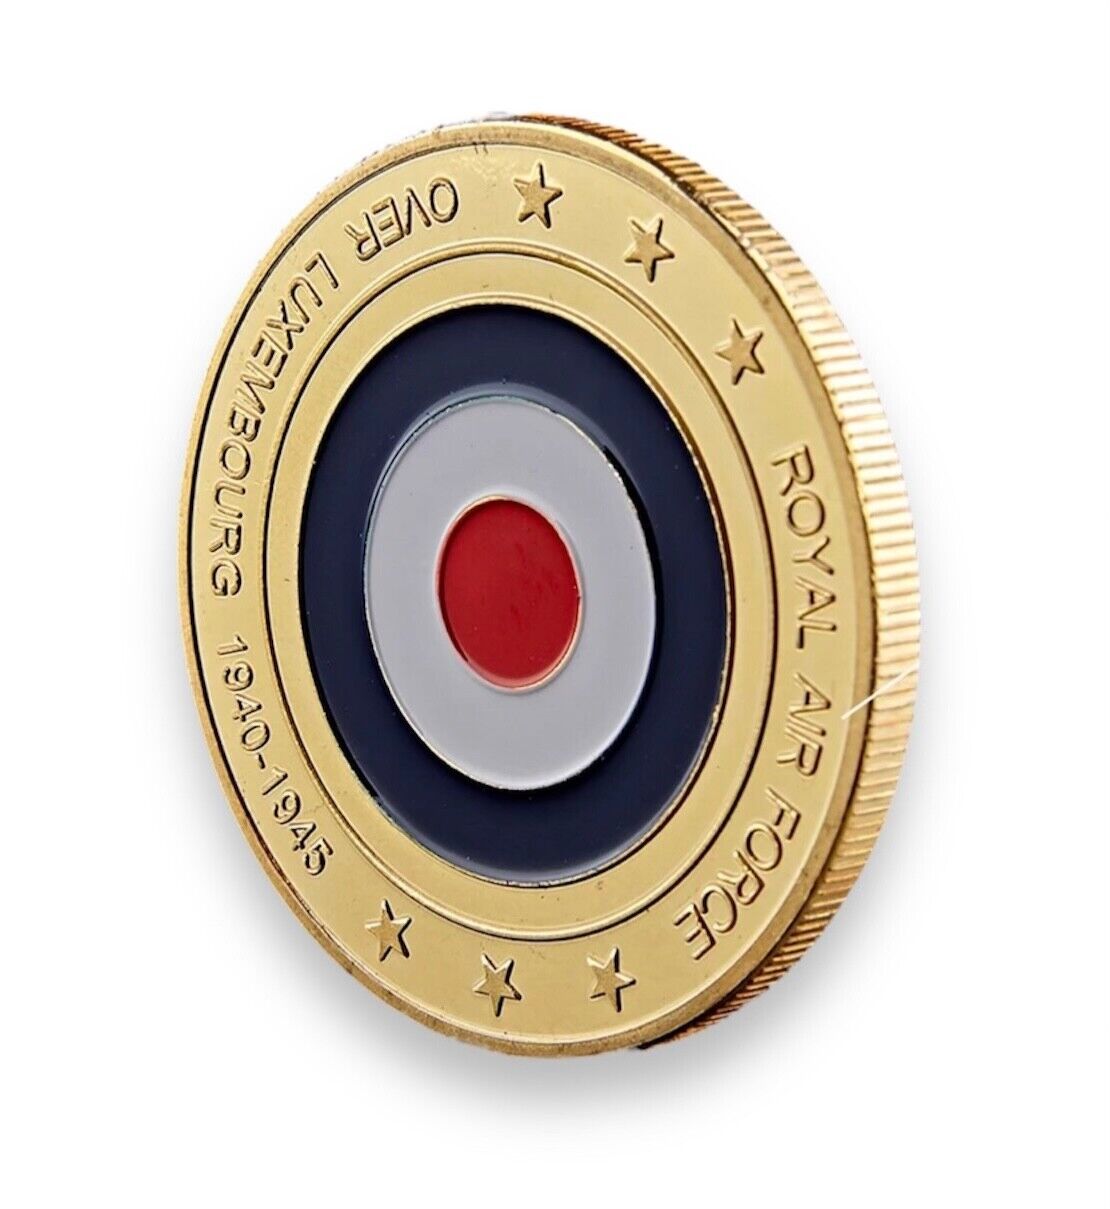 The Official Royal Air Force Commemorative Gold Plated Coin